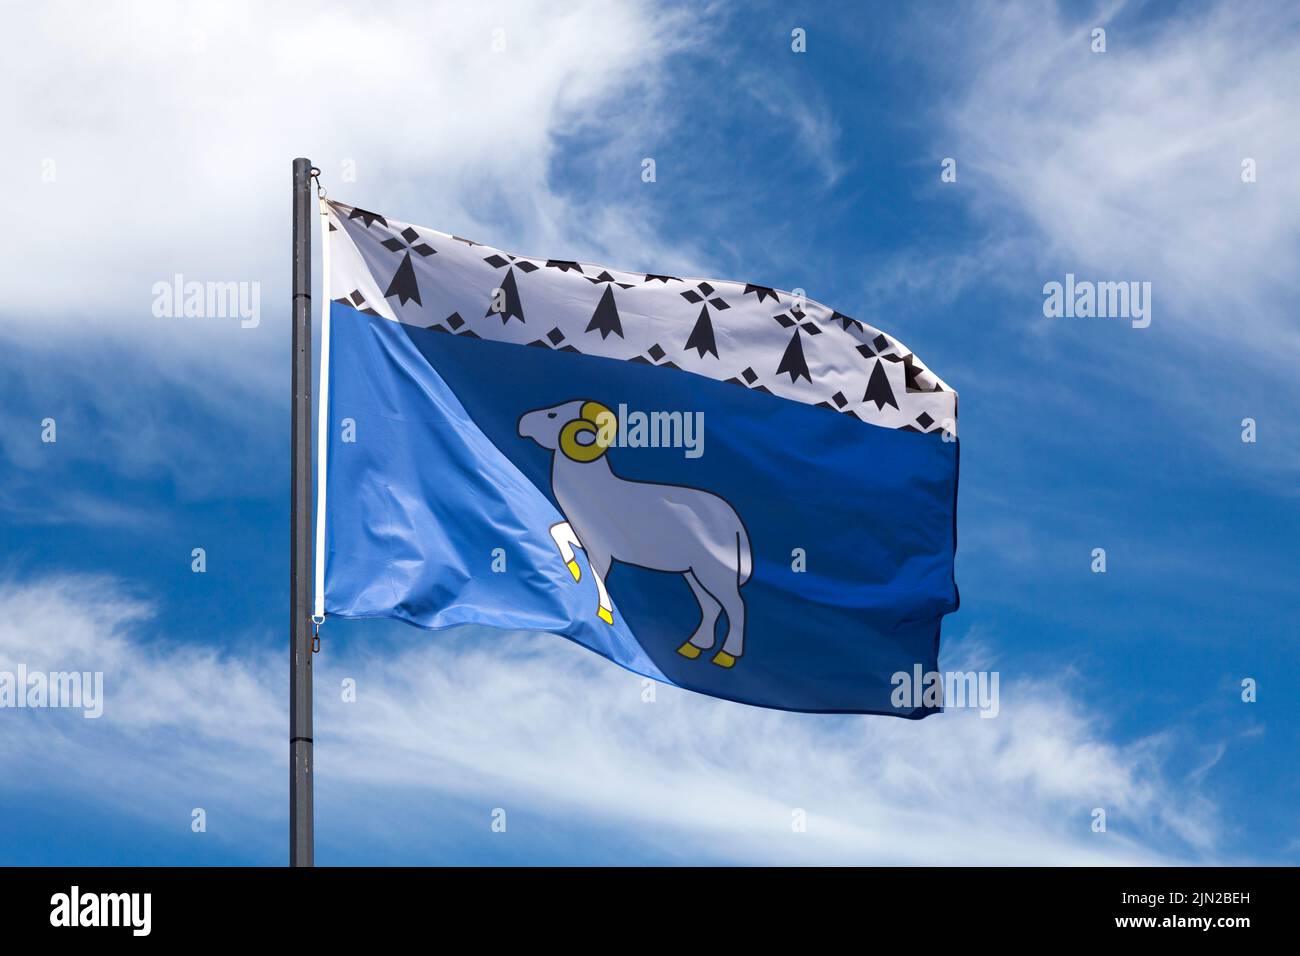 Flag of the city of Quimper waving in mid air. Stock Photo